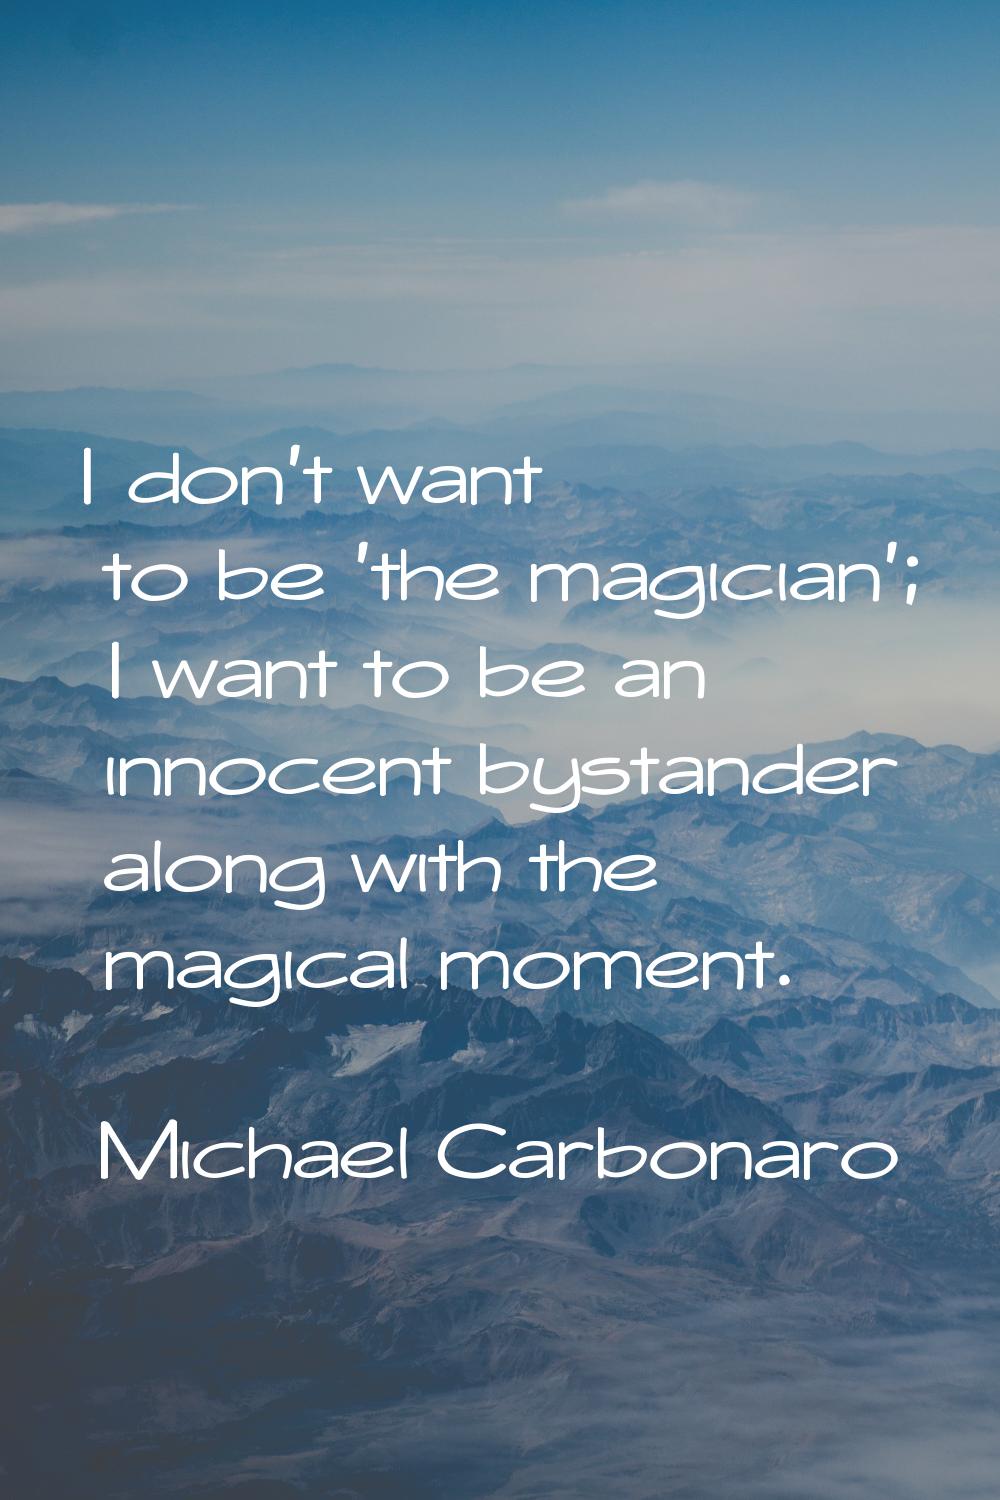 I don't want to be 'the magician'; I want to be an innocent bystander along with the magical moment